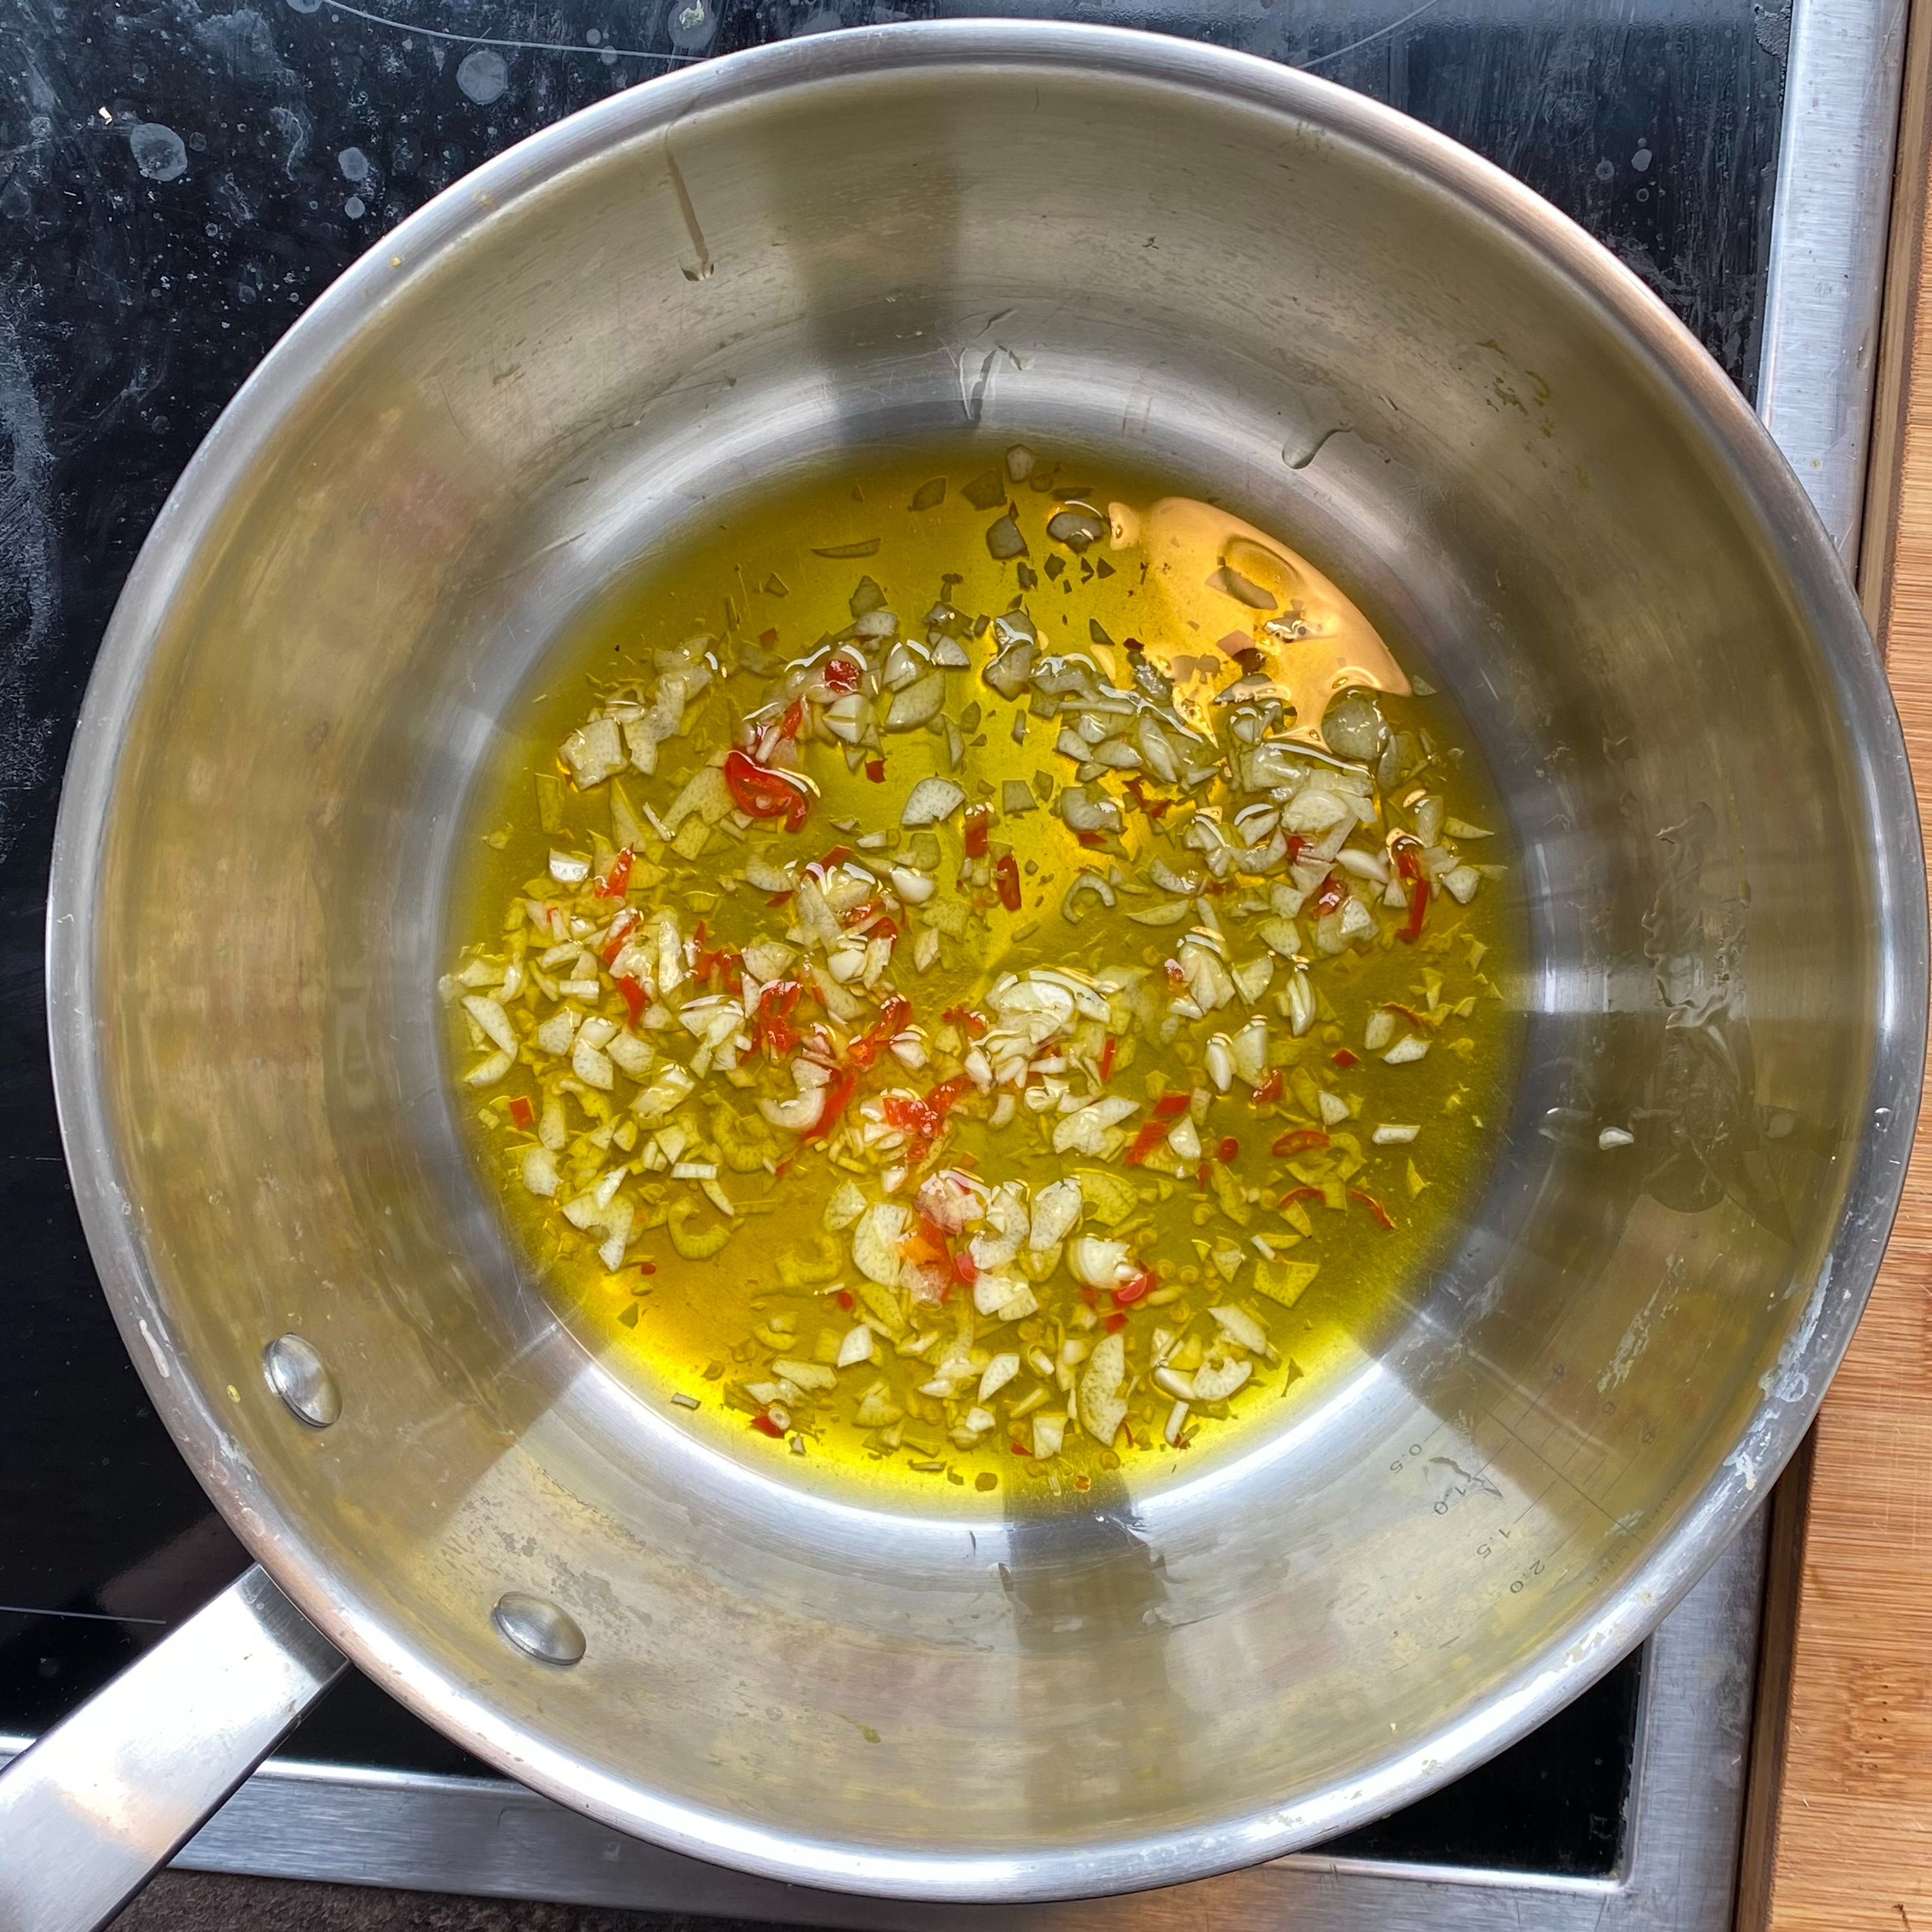 Put the olive oil, garlic and chili in a large pan and let the mixture soak for a couple of minutes.
I recommend at least 5 minutes. The longer it soakes the more taste you get:)